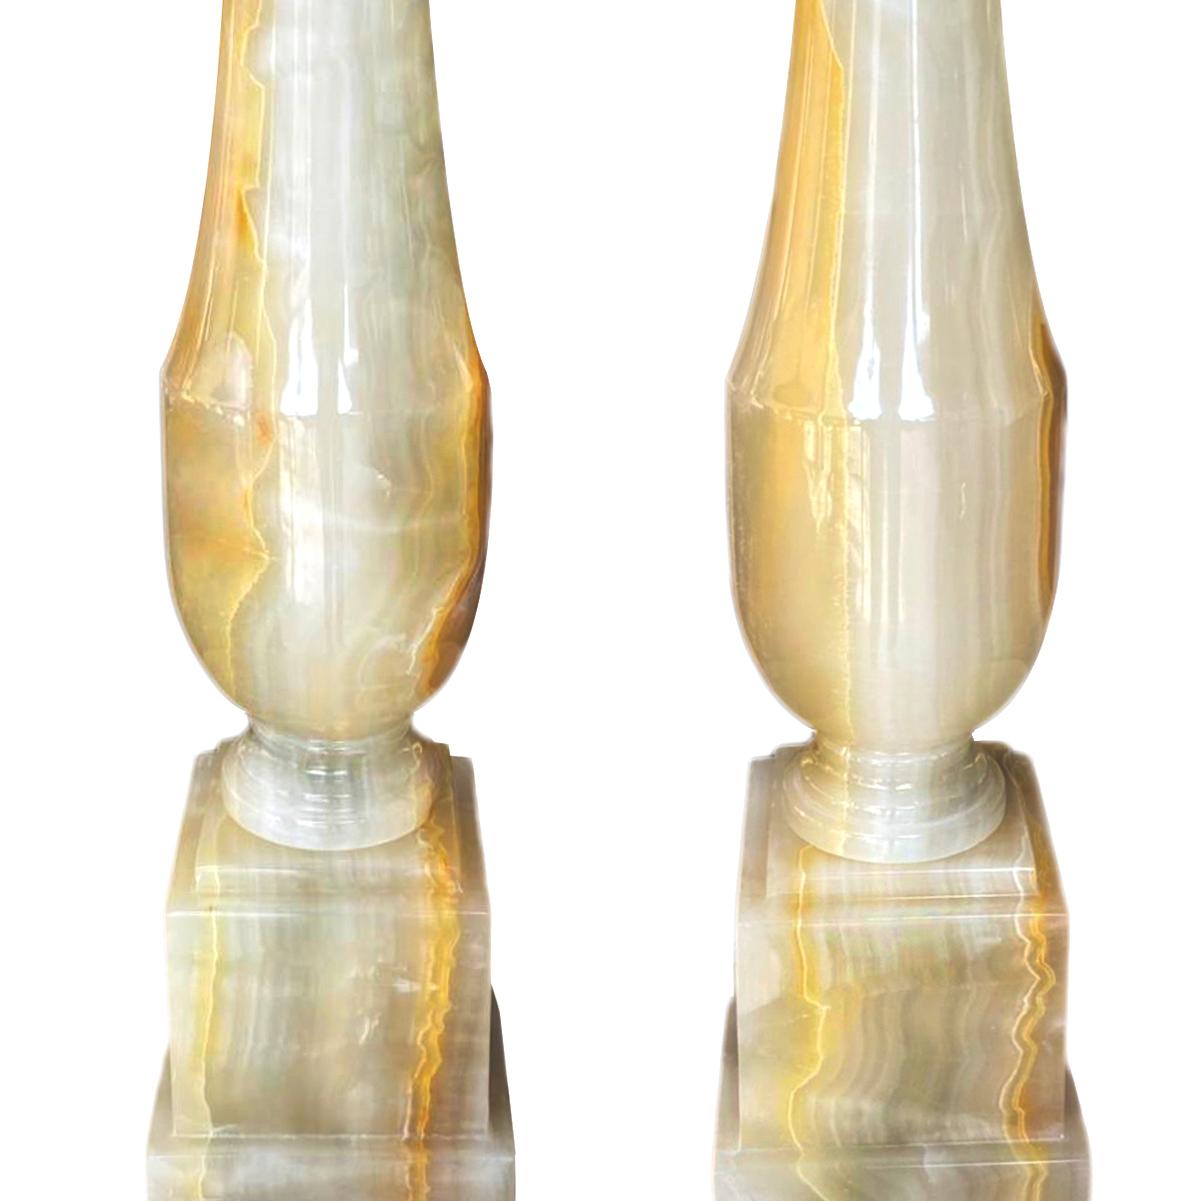 Early 20th Century Pair of Antique Italian Onyx Lamps